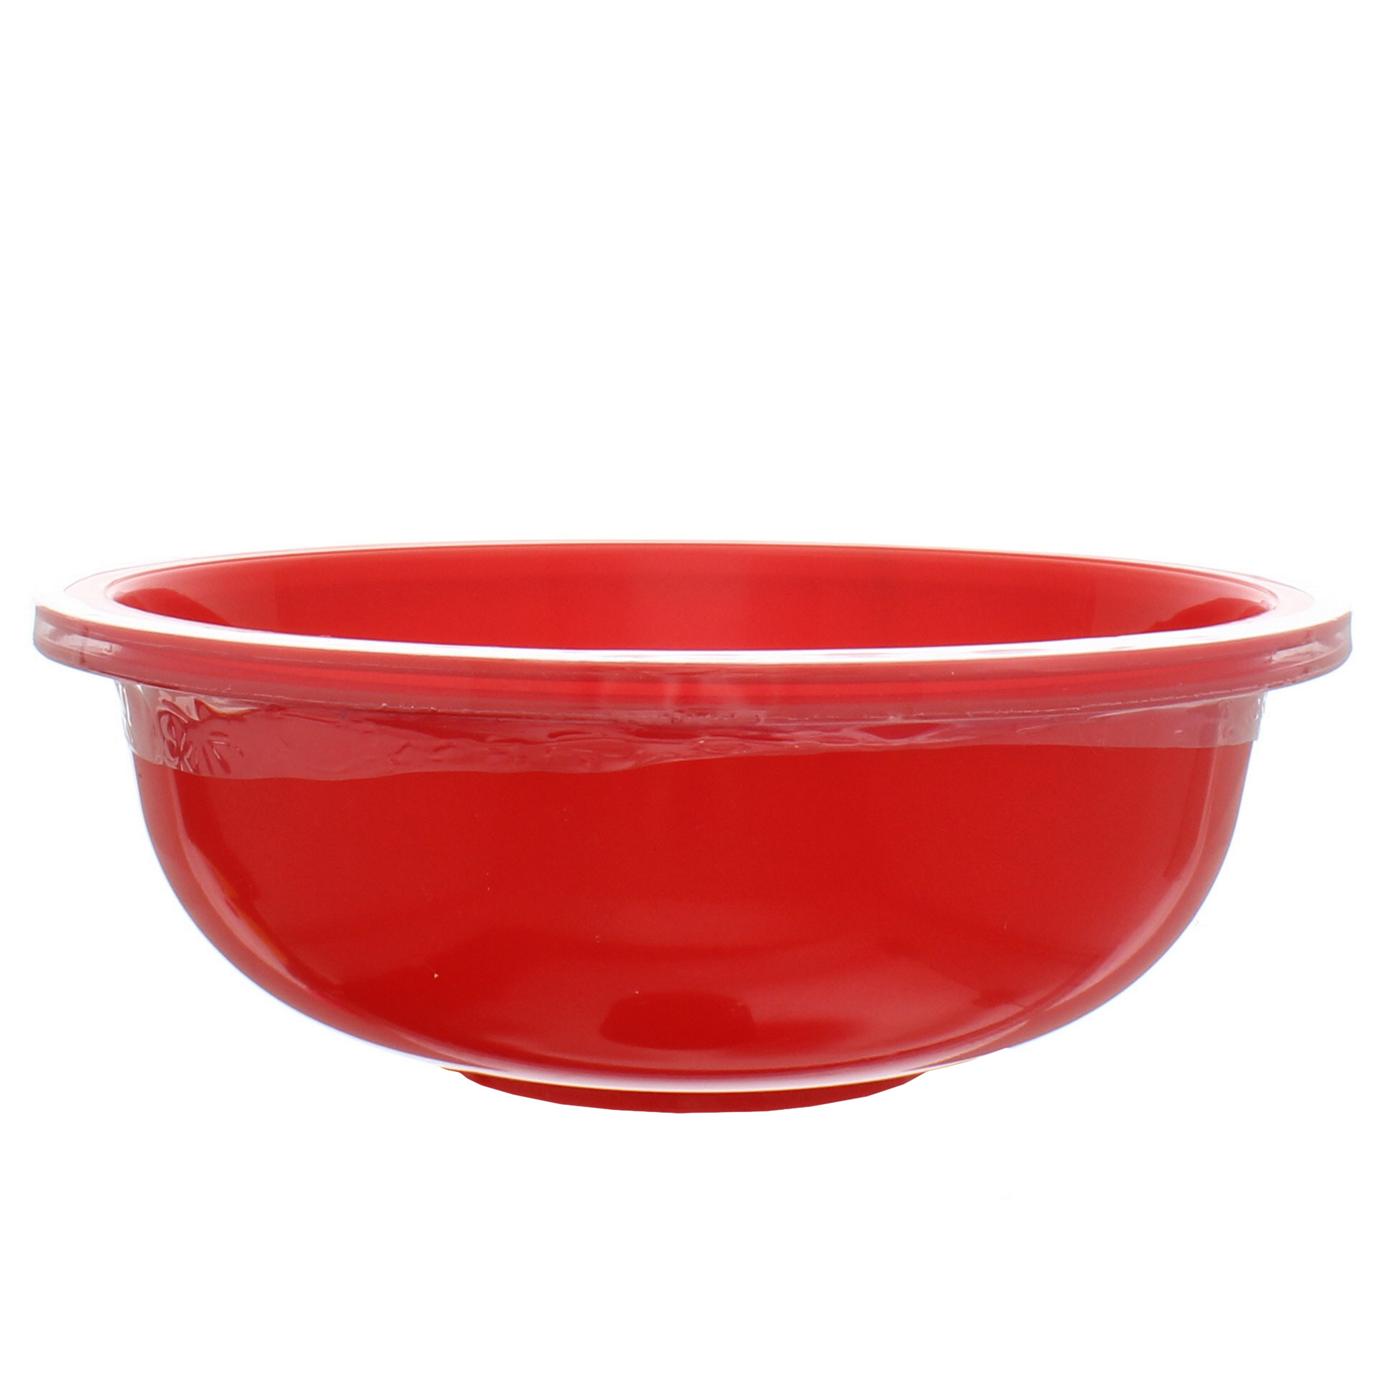 United Solutions Plastic Bowl, assorted colors; image 2 of 2